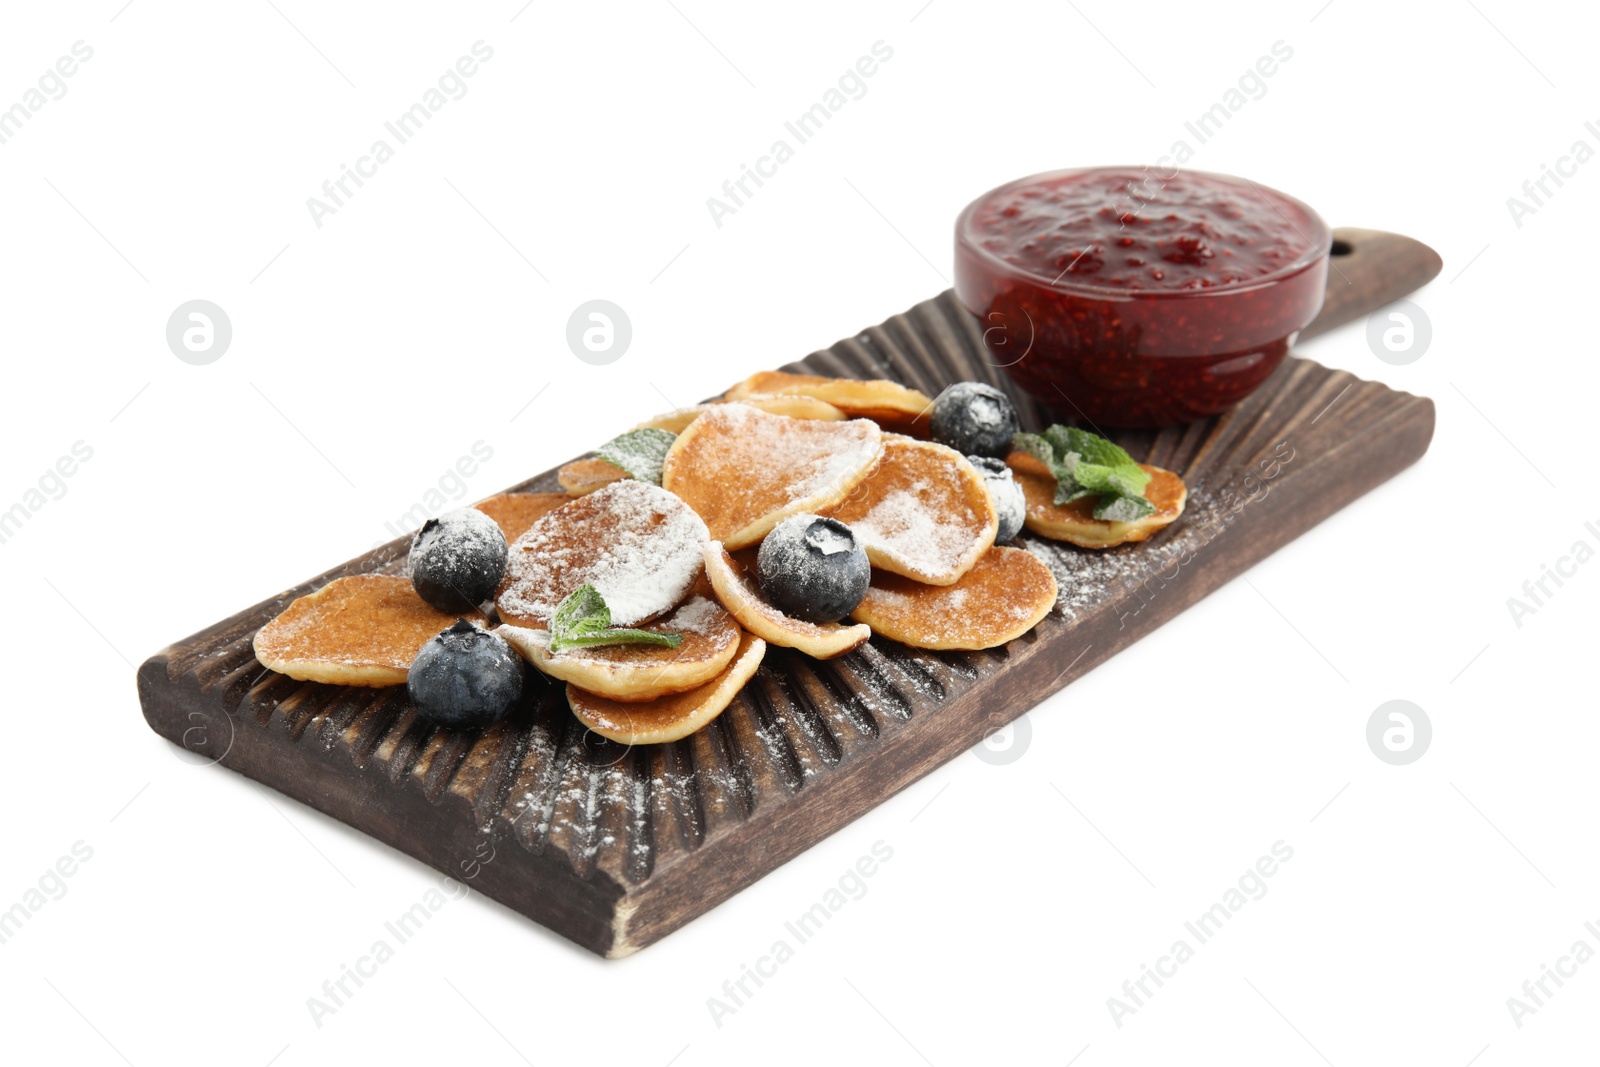 Photo of Wooden board with cereal pancakes, jam and blueberries on white background